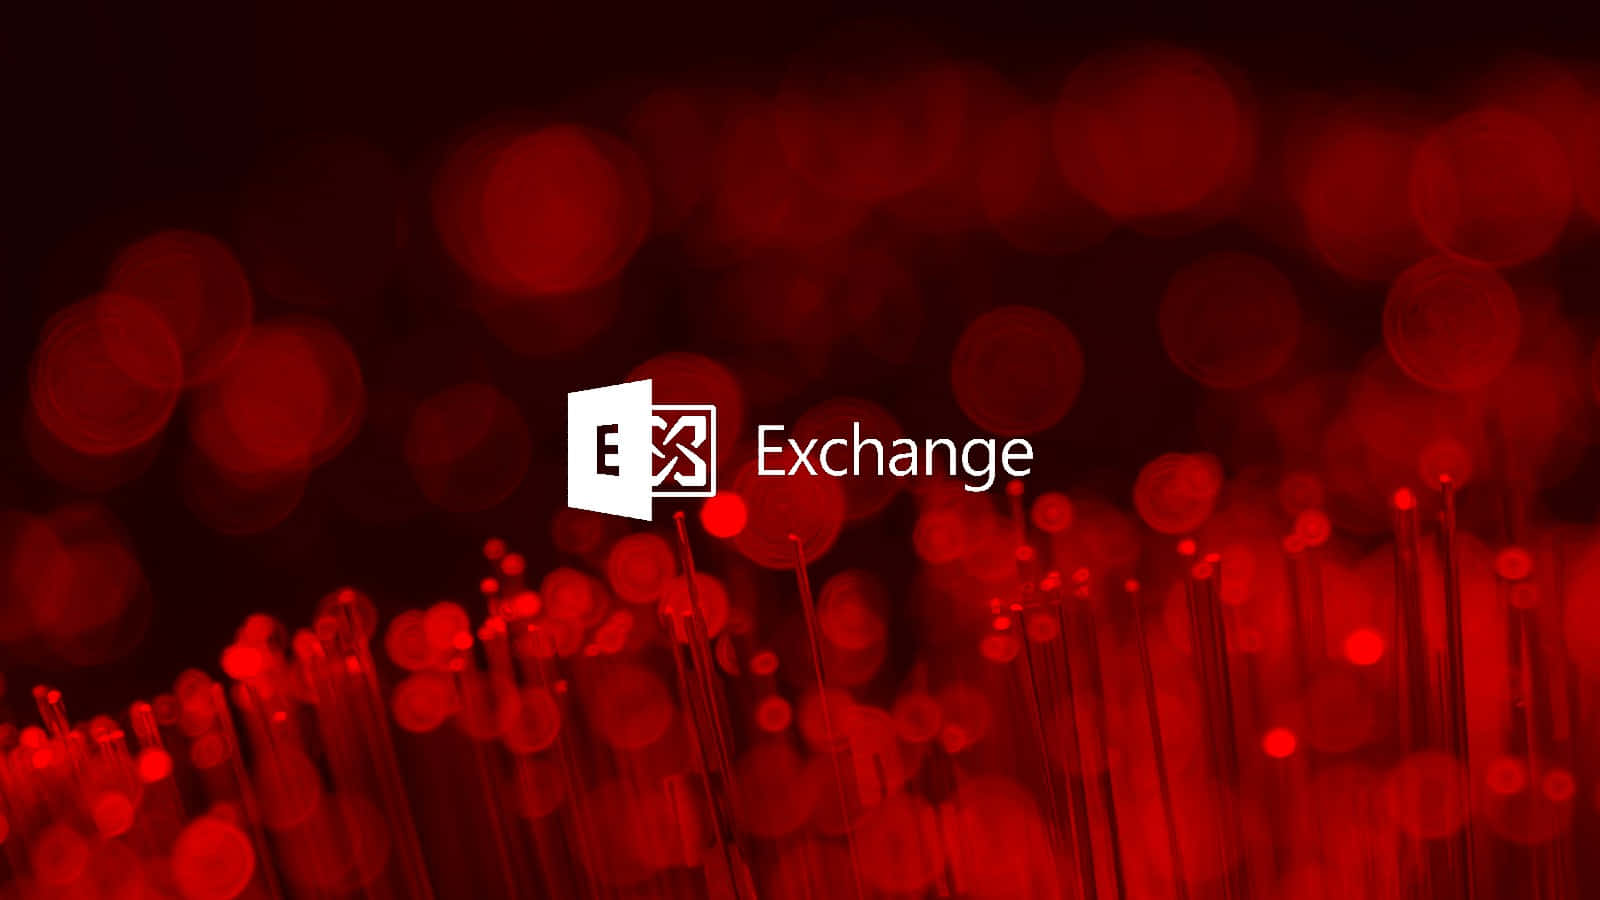 Exchange Markets and Trading Wallpaper